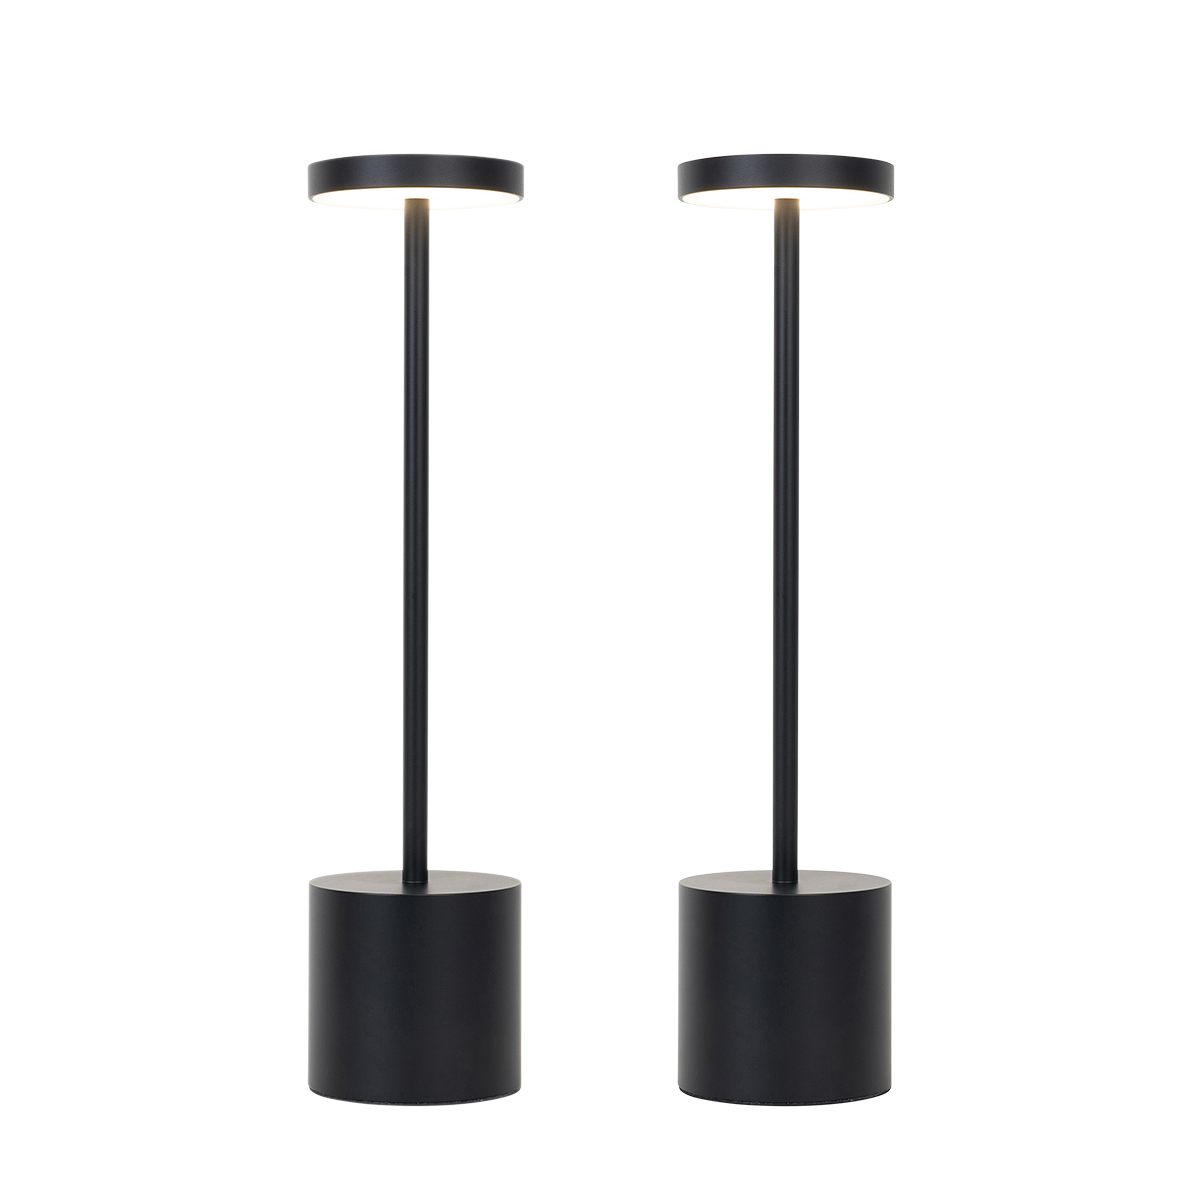 Set of 2 Outdoor Table Lamps Black Incl. LED and Dimmer Rechargeable - Dupont